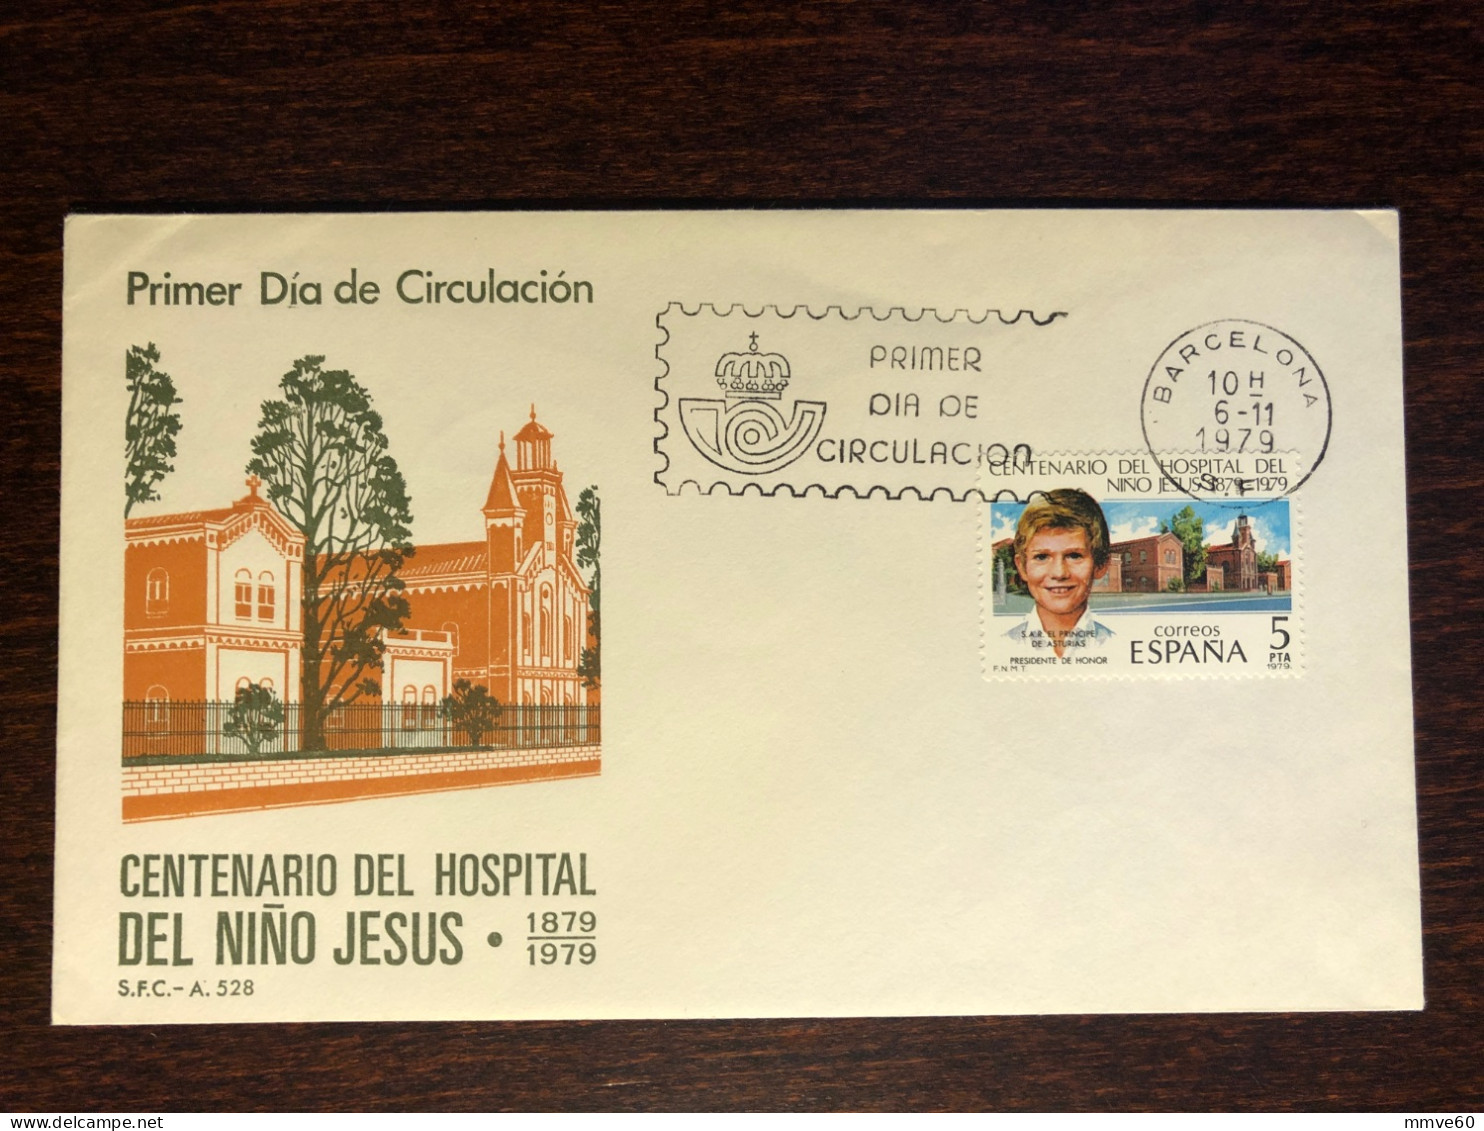 SPAIN FDC COVER 1979 YEAR CHILDREN HOSPITAL HEALTH MEDICINE STAMPS - FDC